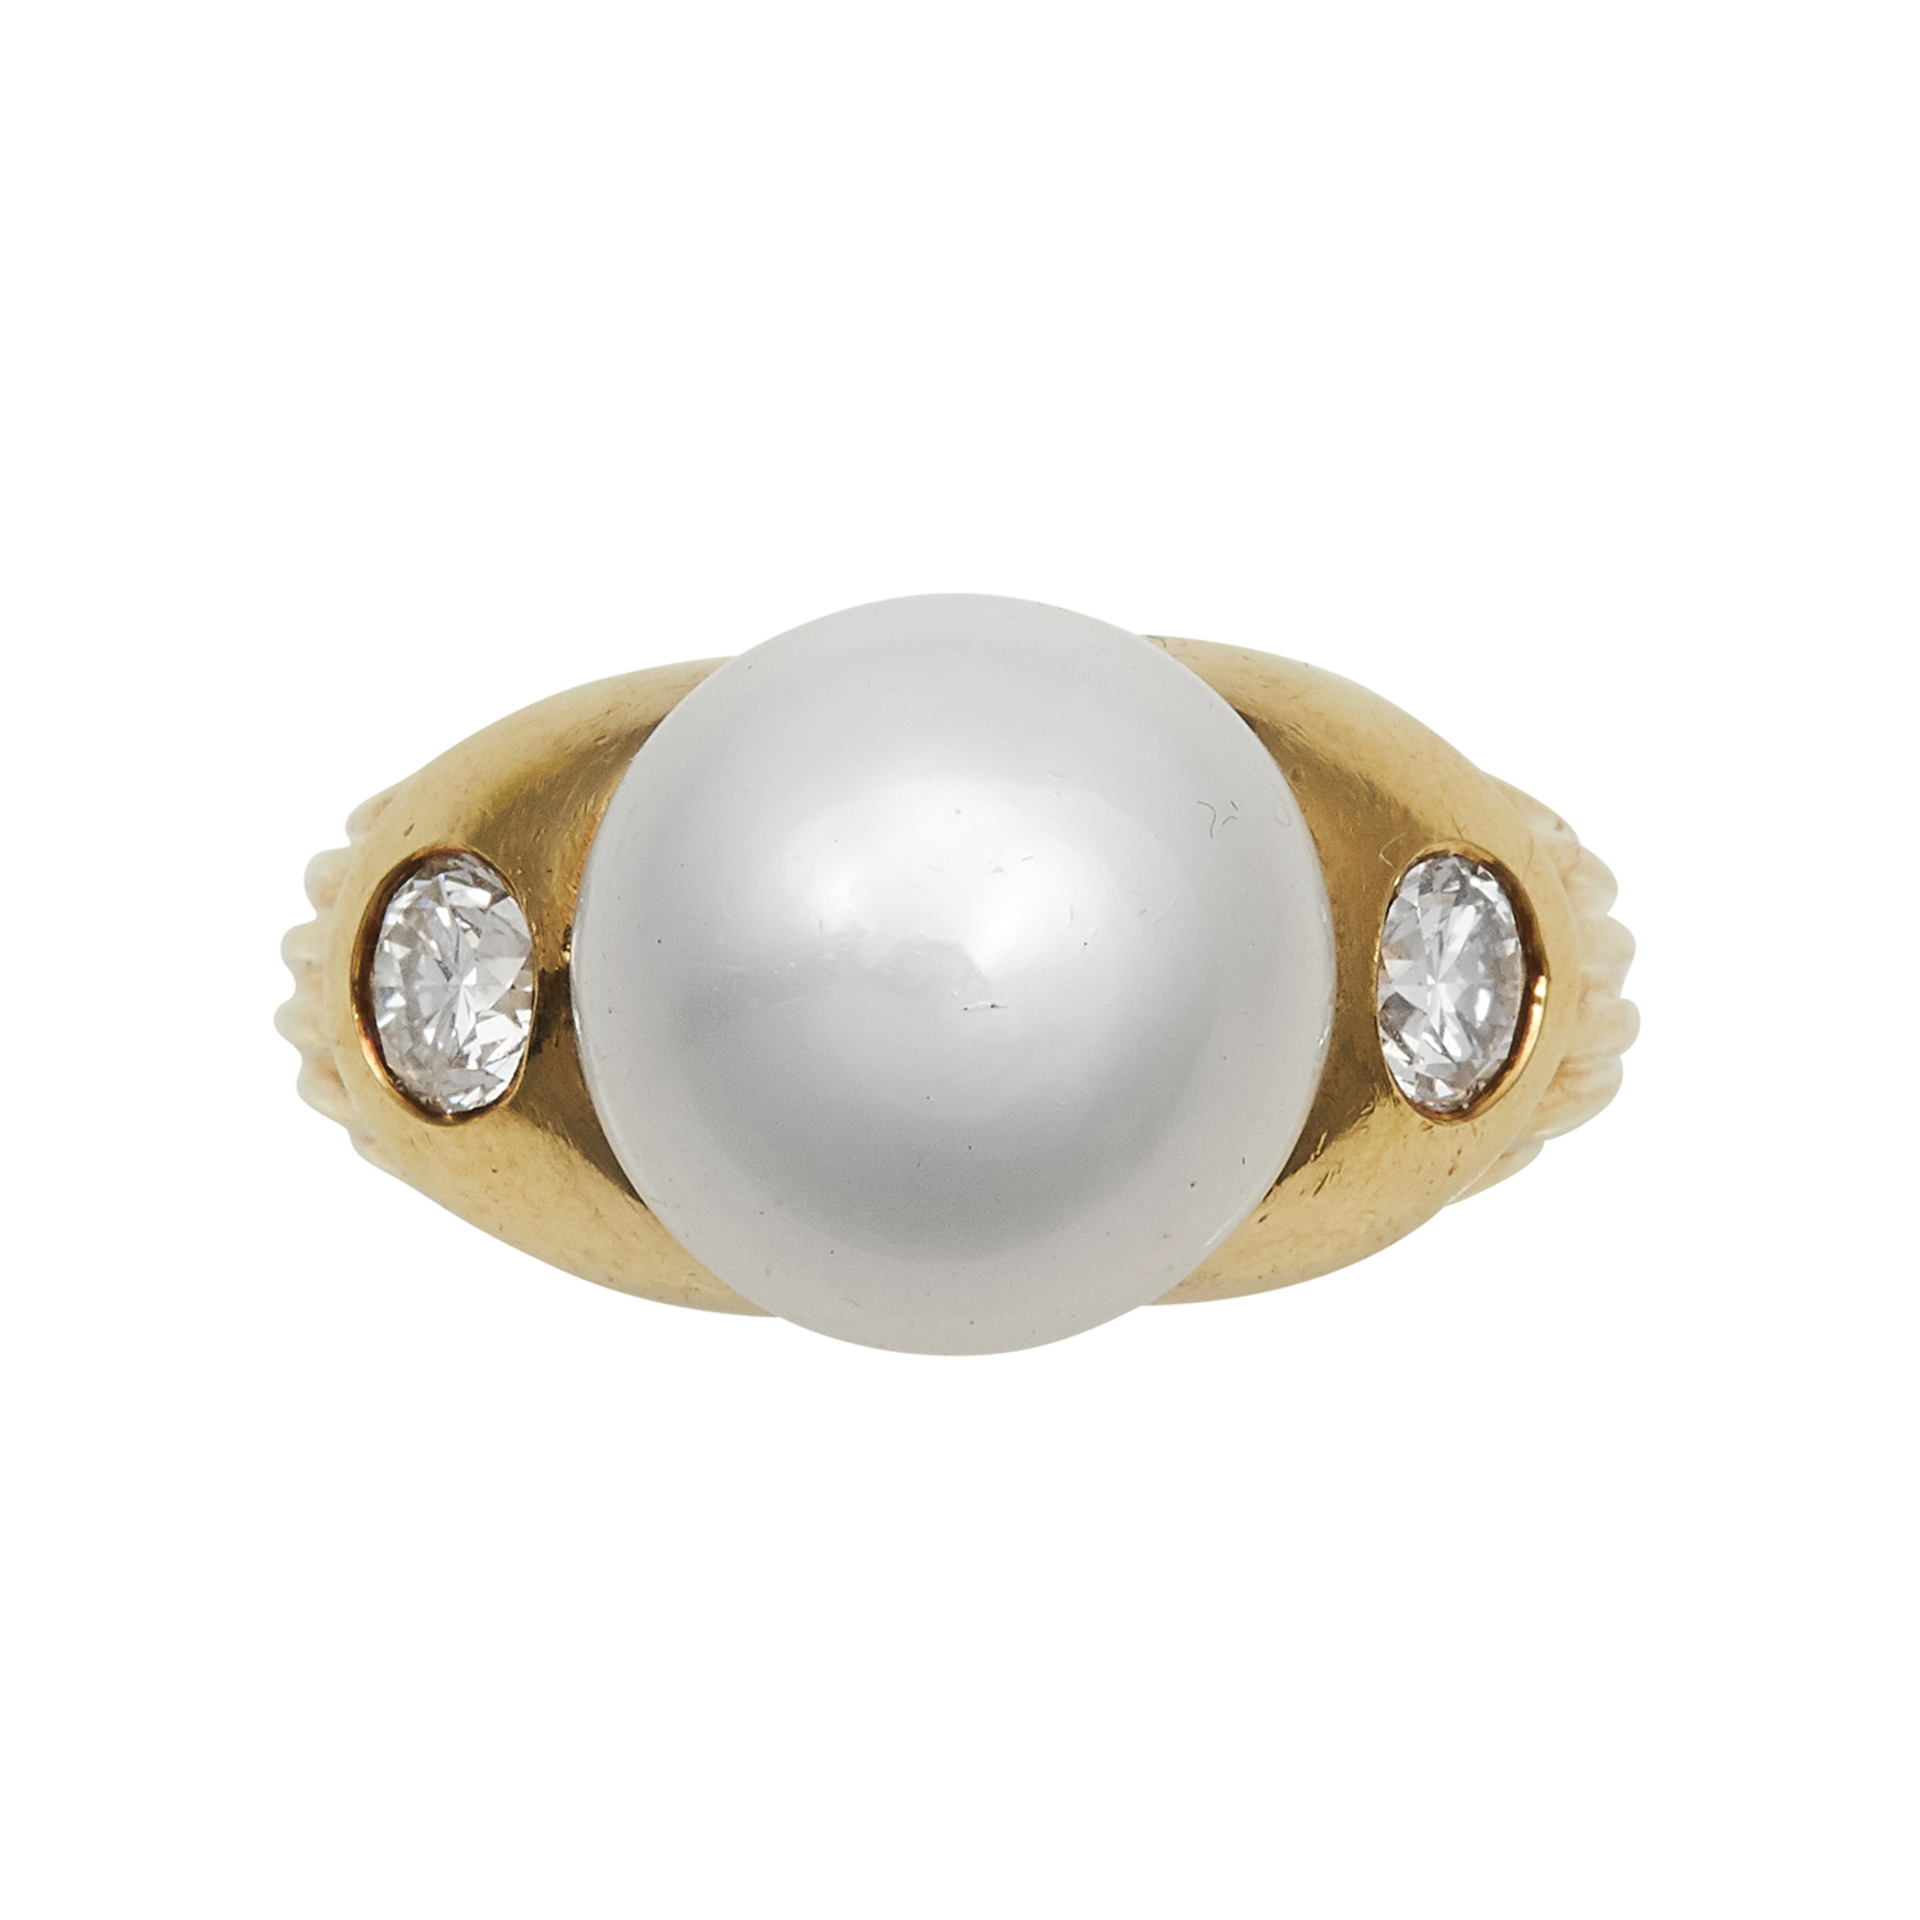 A PEARL AND DIAMOND THREE STONE RING in high carat yellow gold, set with a central pearl of 11.